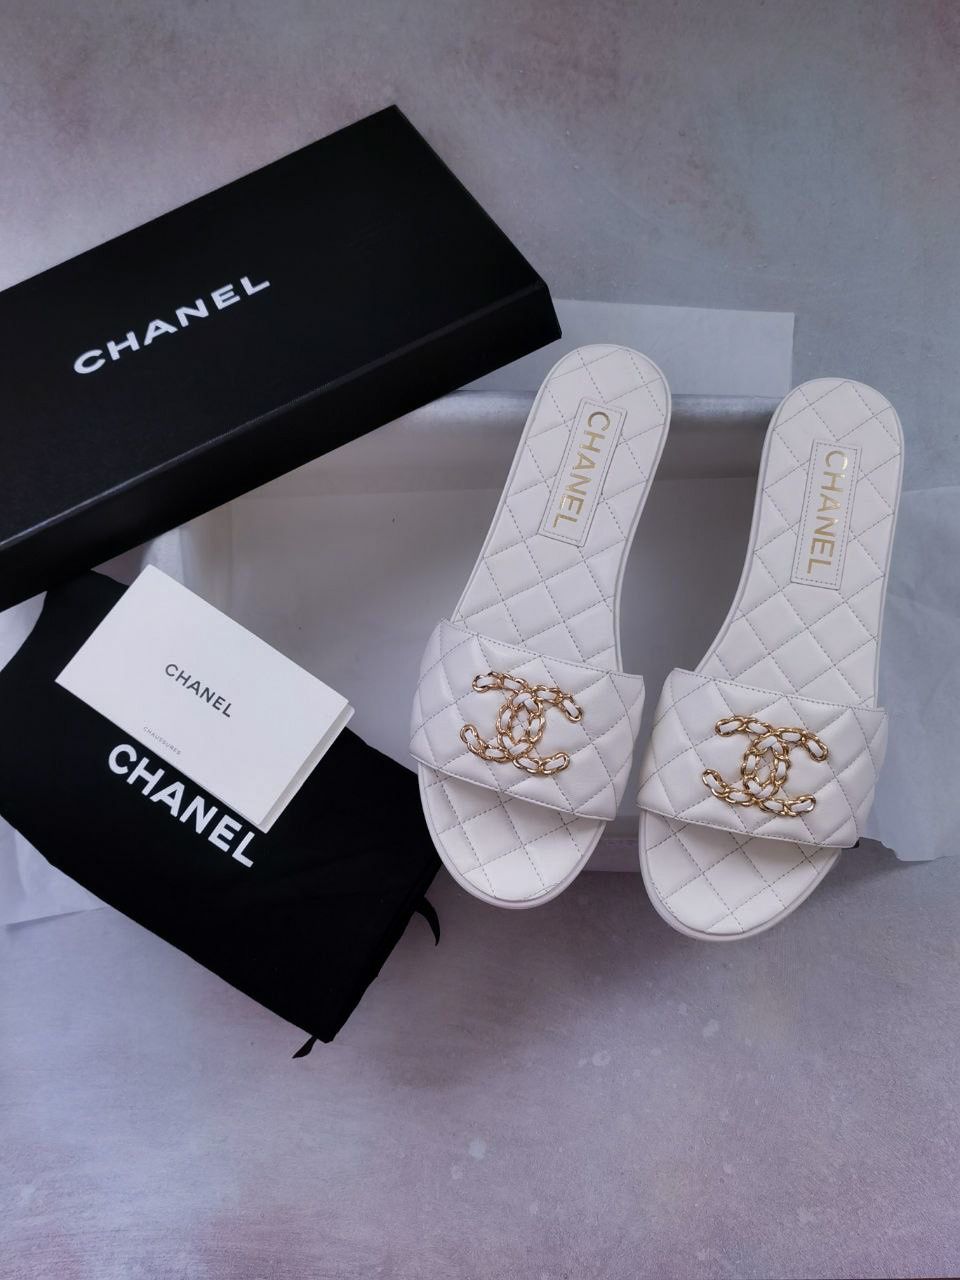 CHANEL, Shoes, Chanel Sport Trail Size 385